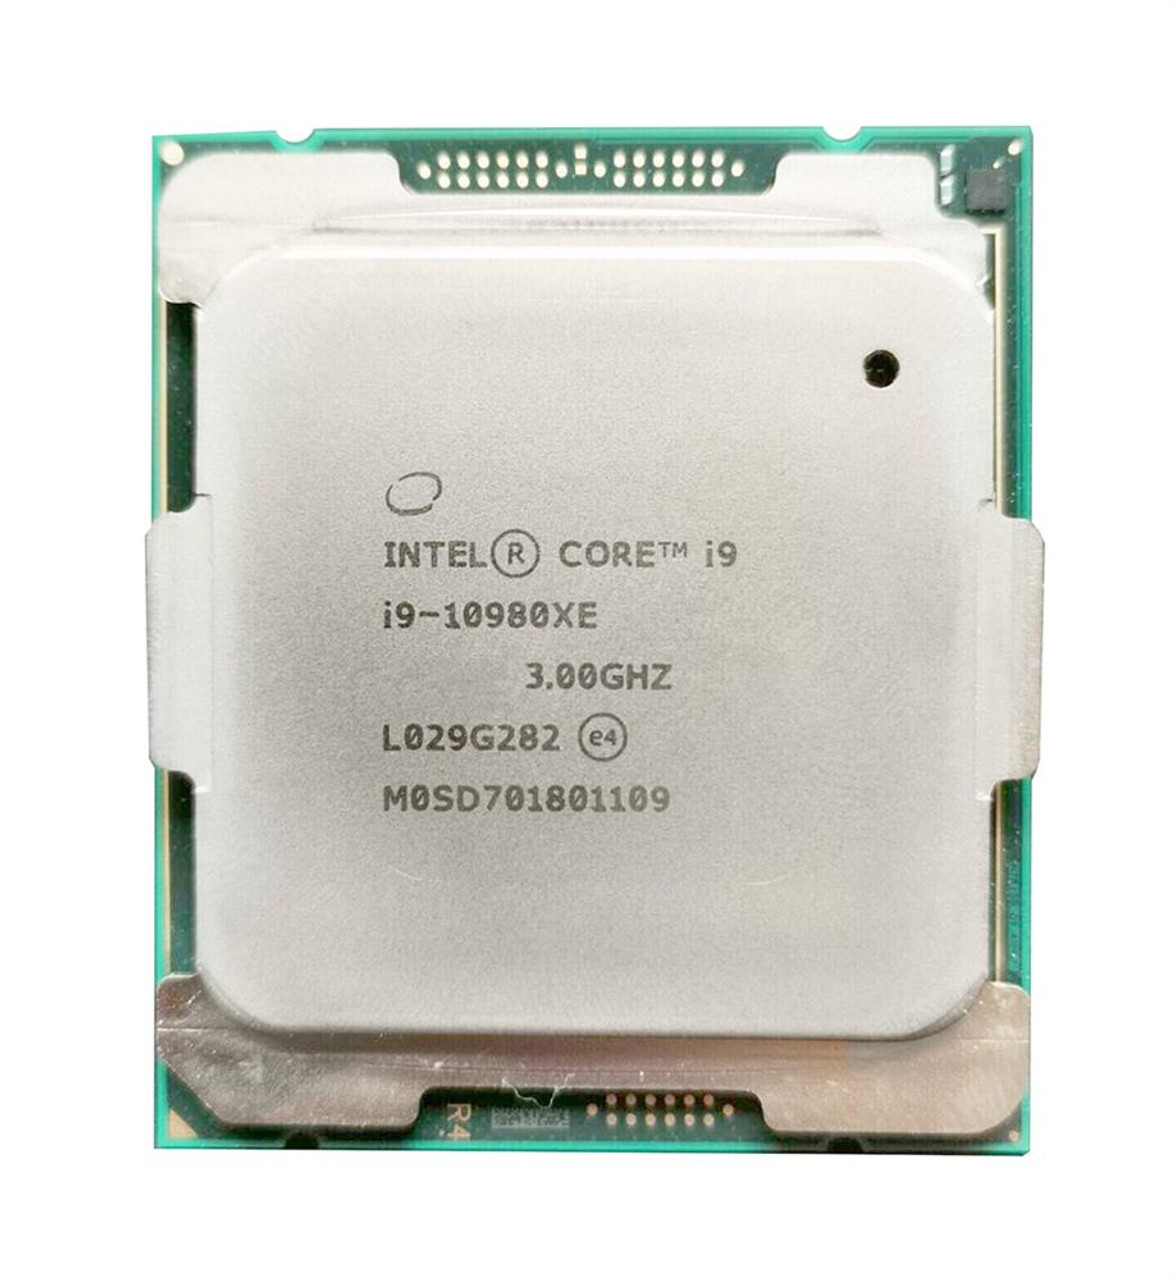 Intel Core i9 10980XE Review Leaks Out - Controversially Scores